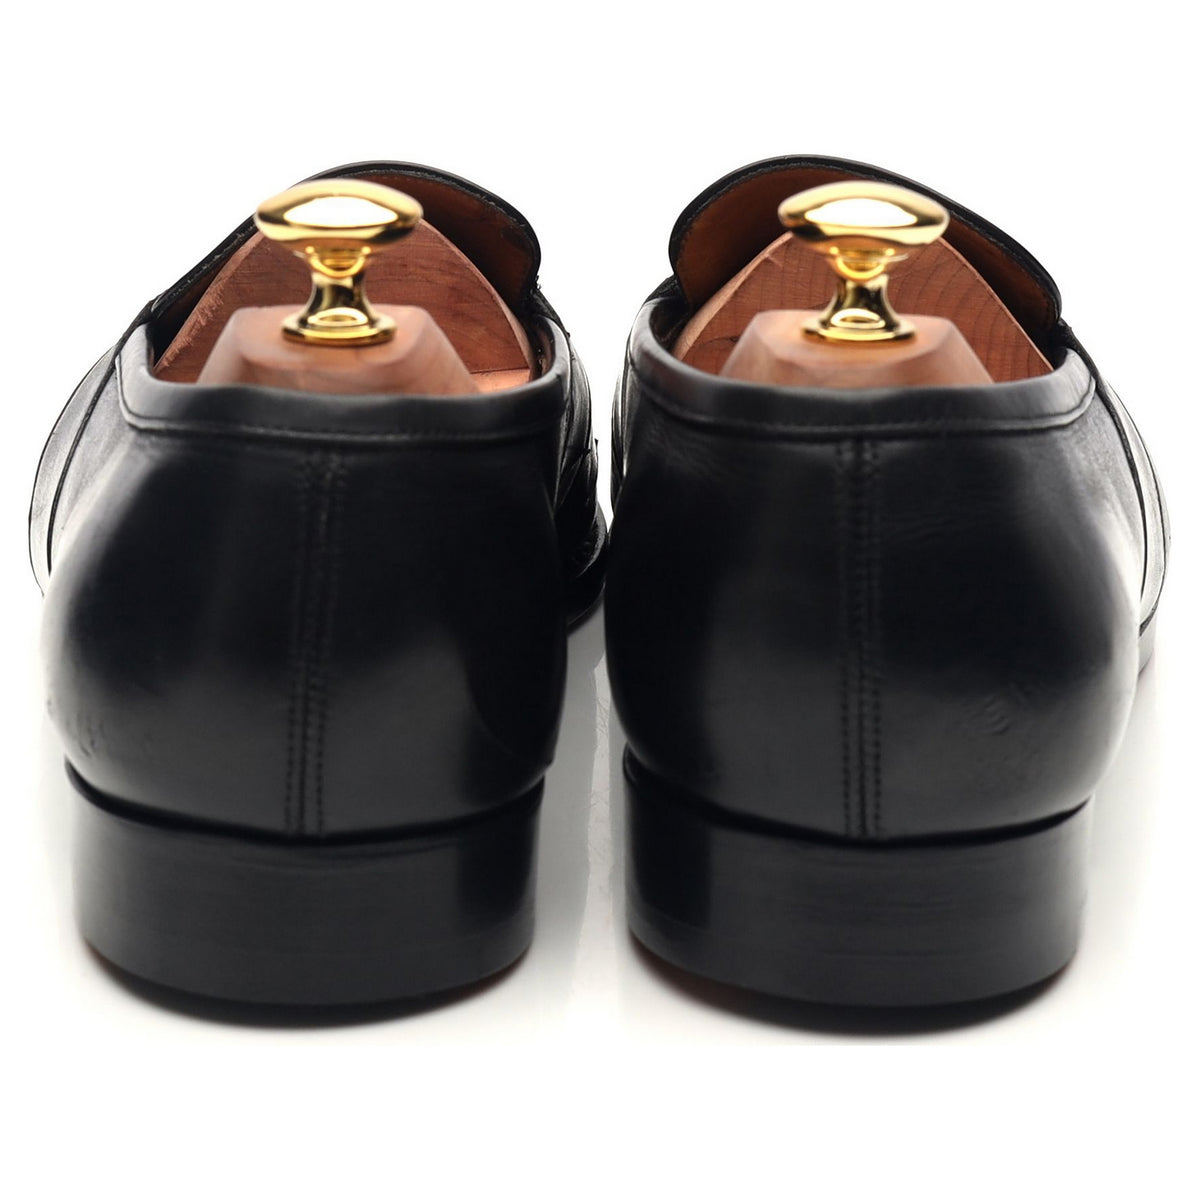 &#39;Montpellier&#39; Black Leather Loafers UK 9.5 E